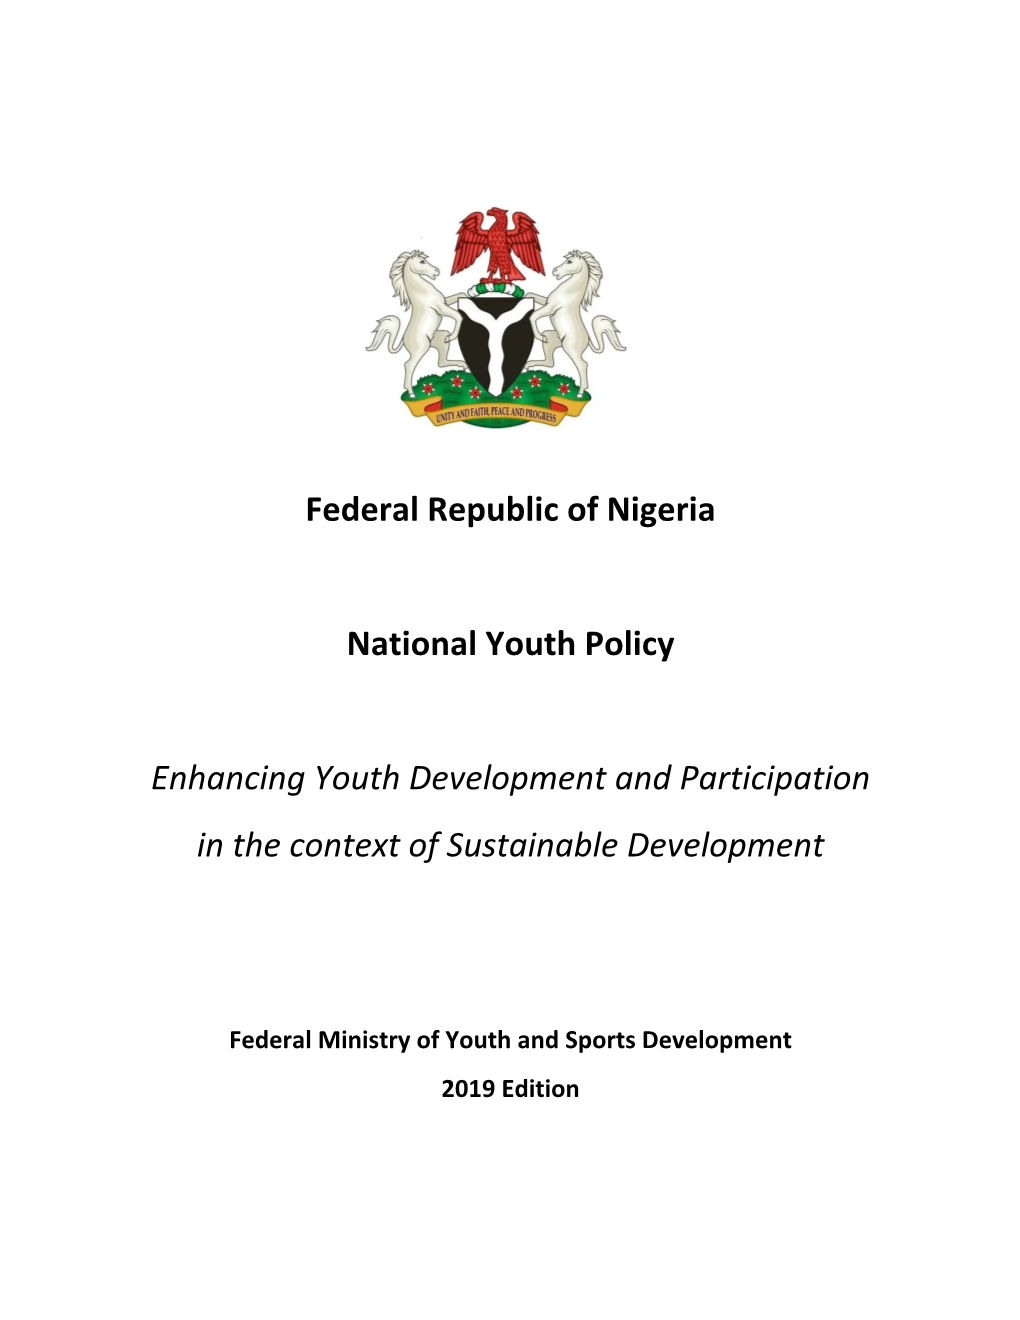 National Youth Policy